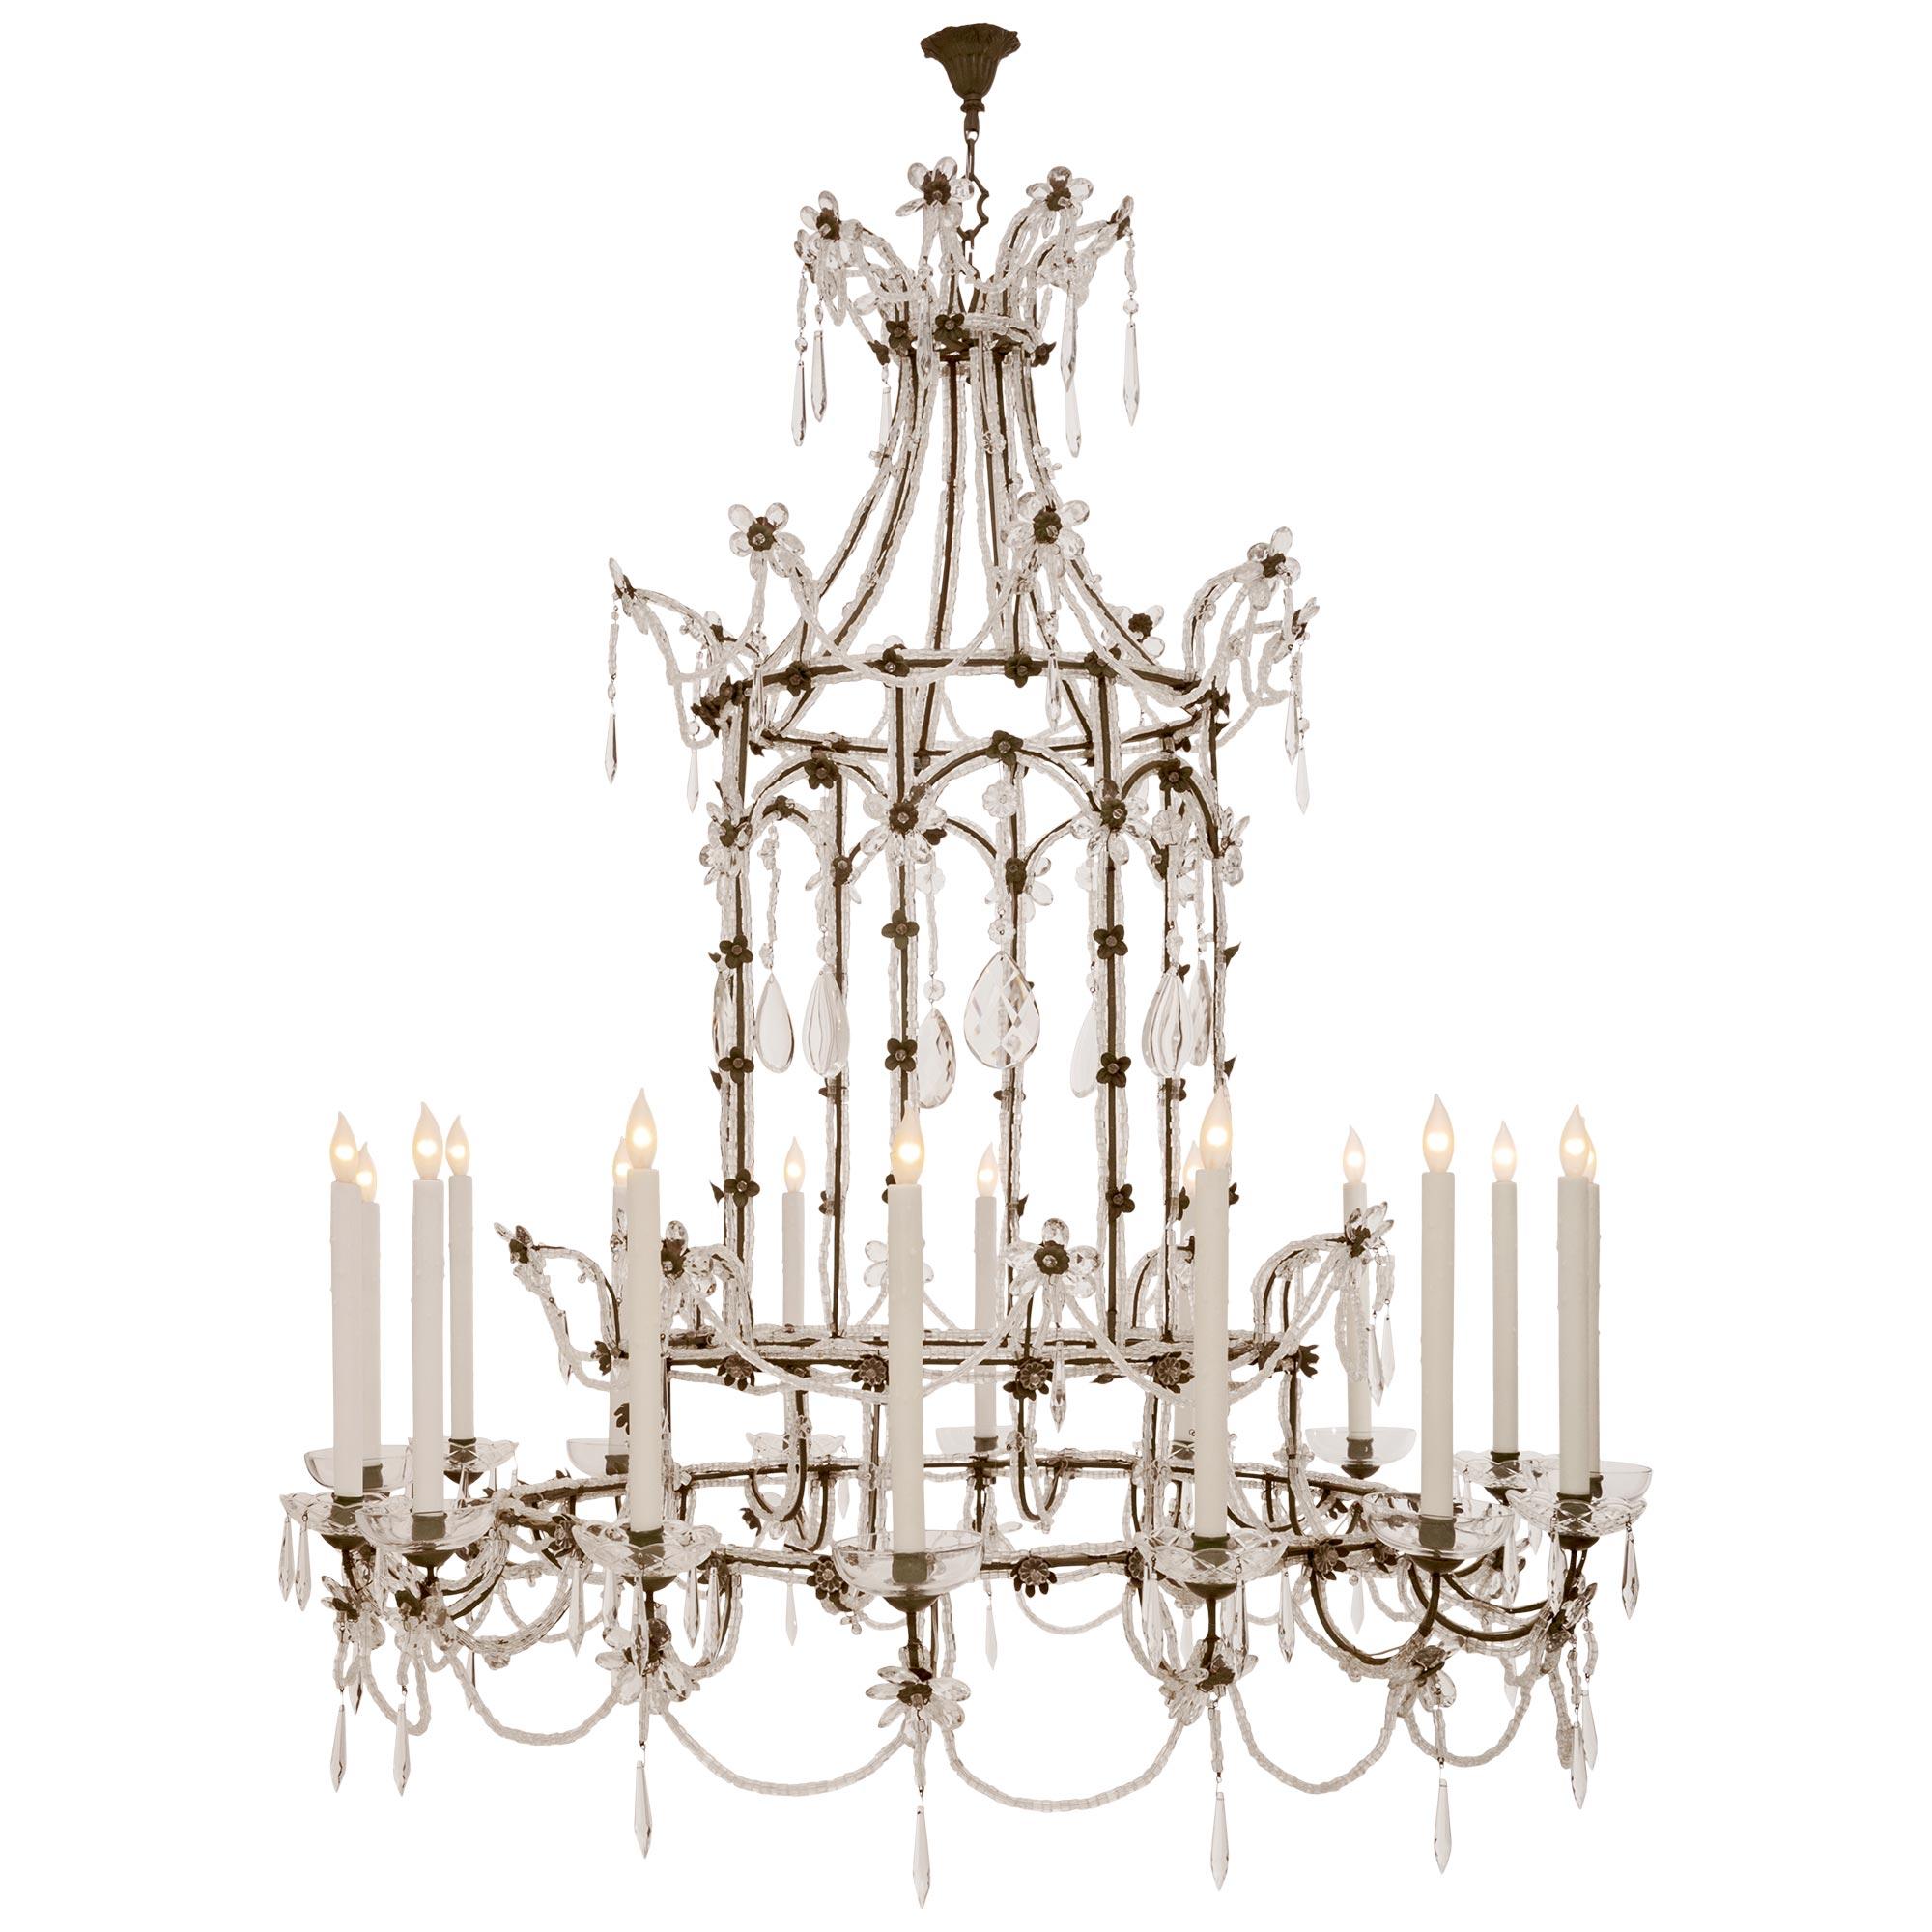 Italian Turn Of The Century Iron, Crystal And Cut Glass Chandelier In Good Condition For Sale In West Palm Beach, FL